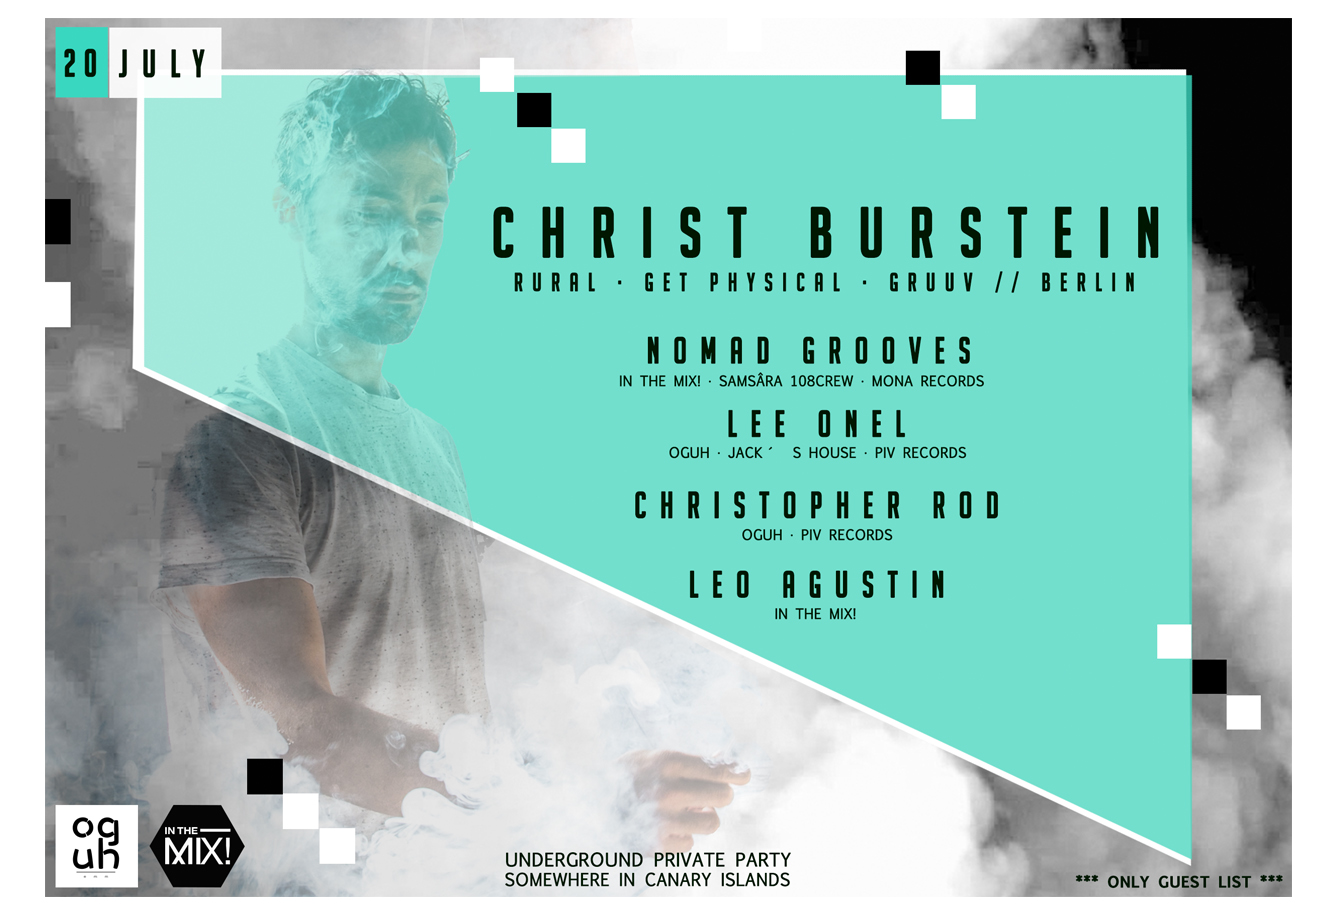 IN THE MIX! Special Guest Christ Burstein